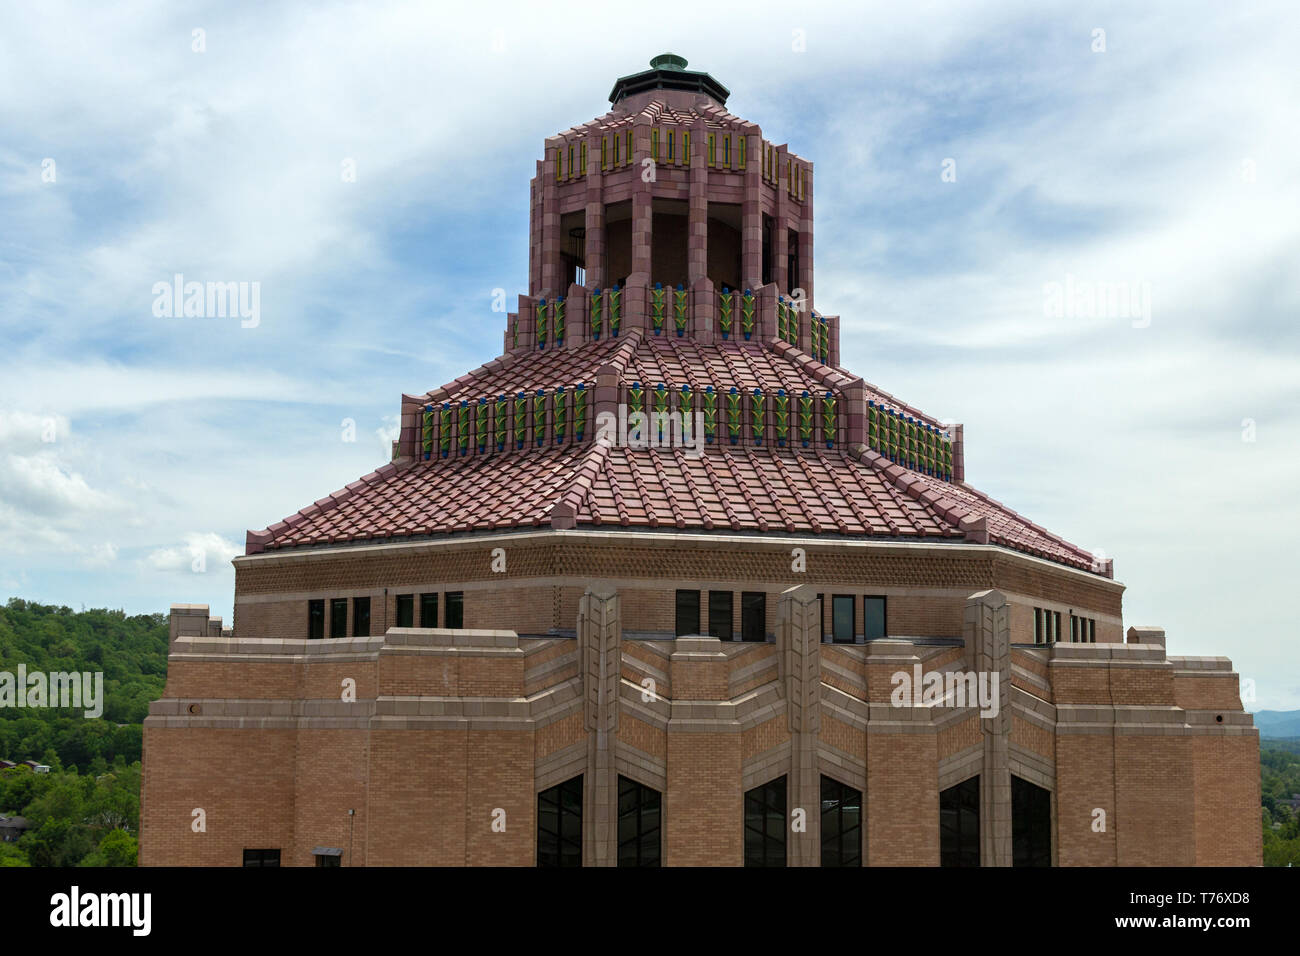 The octagonal roof and cupola of the City Building in Asheville, NC, USA Stock Photo